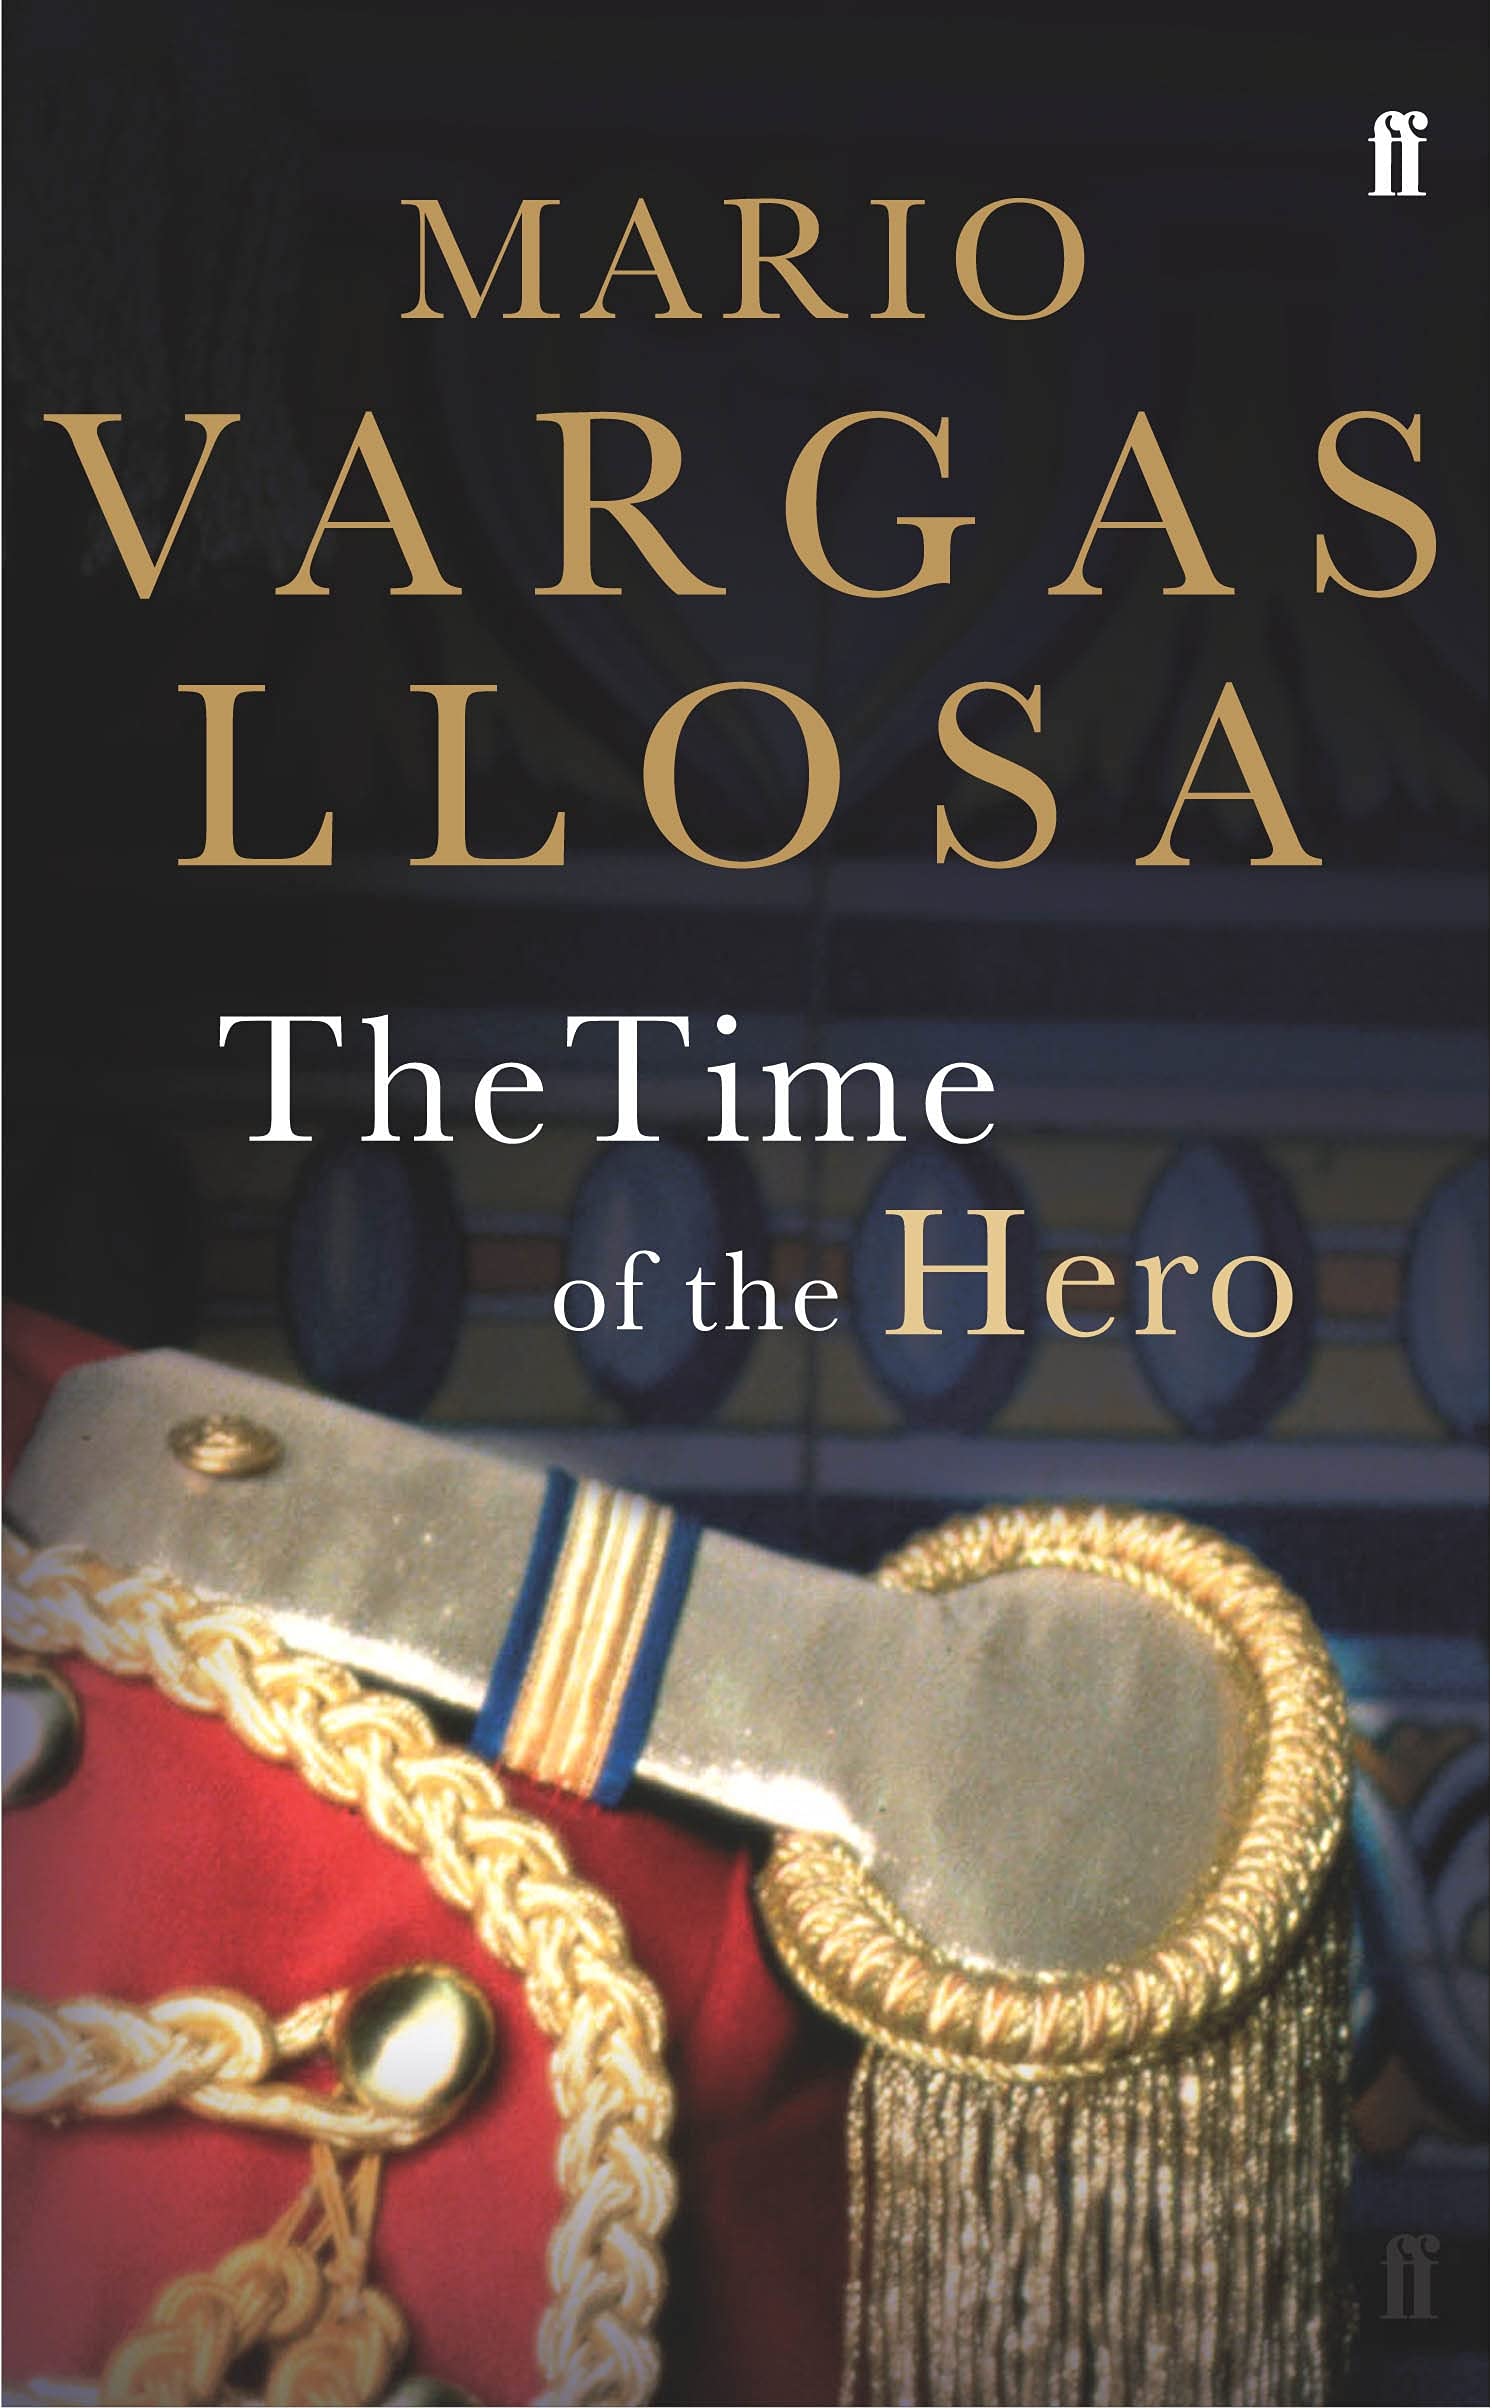 Mario Vargas Llosa - The Time of the Hero